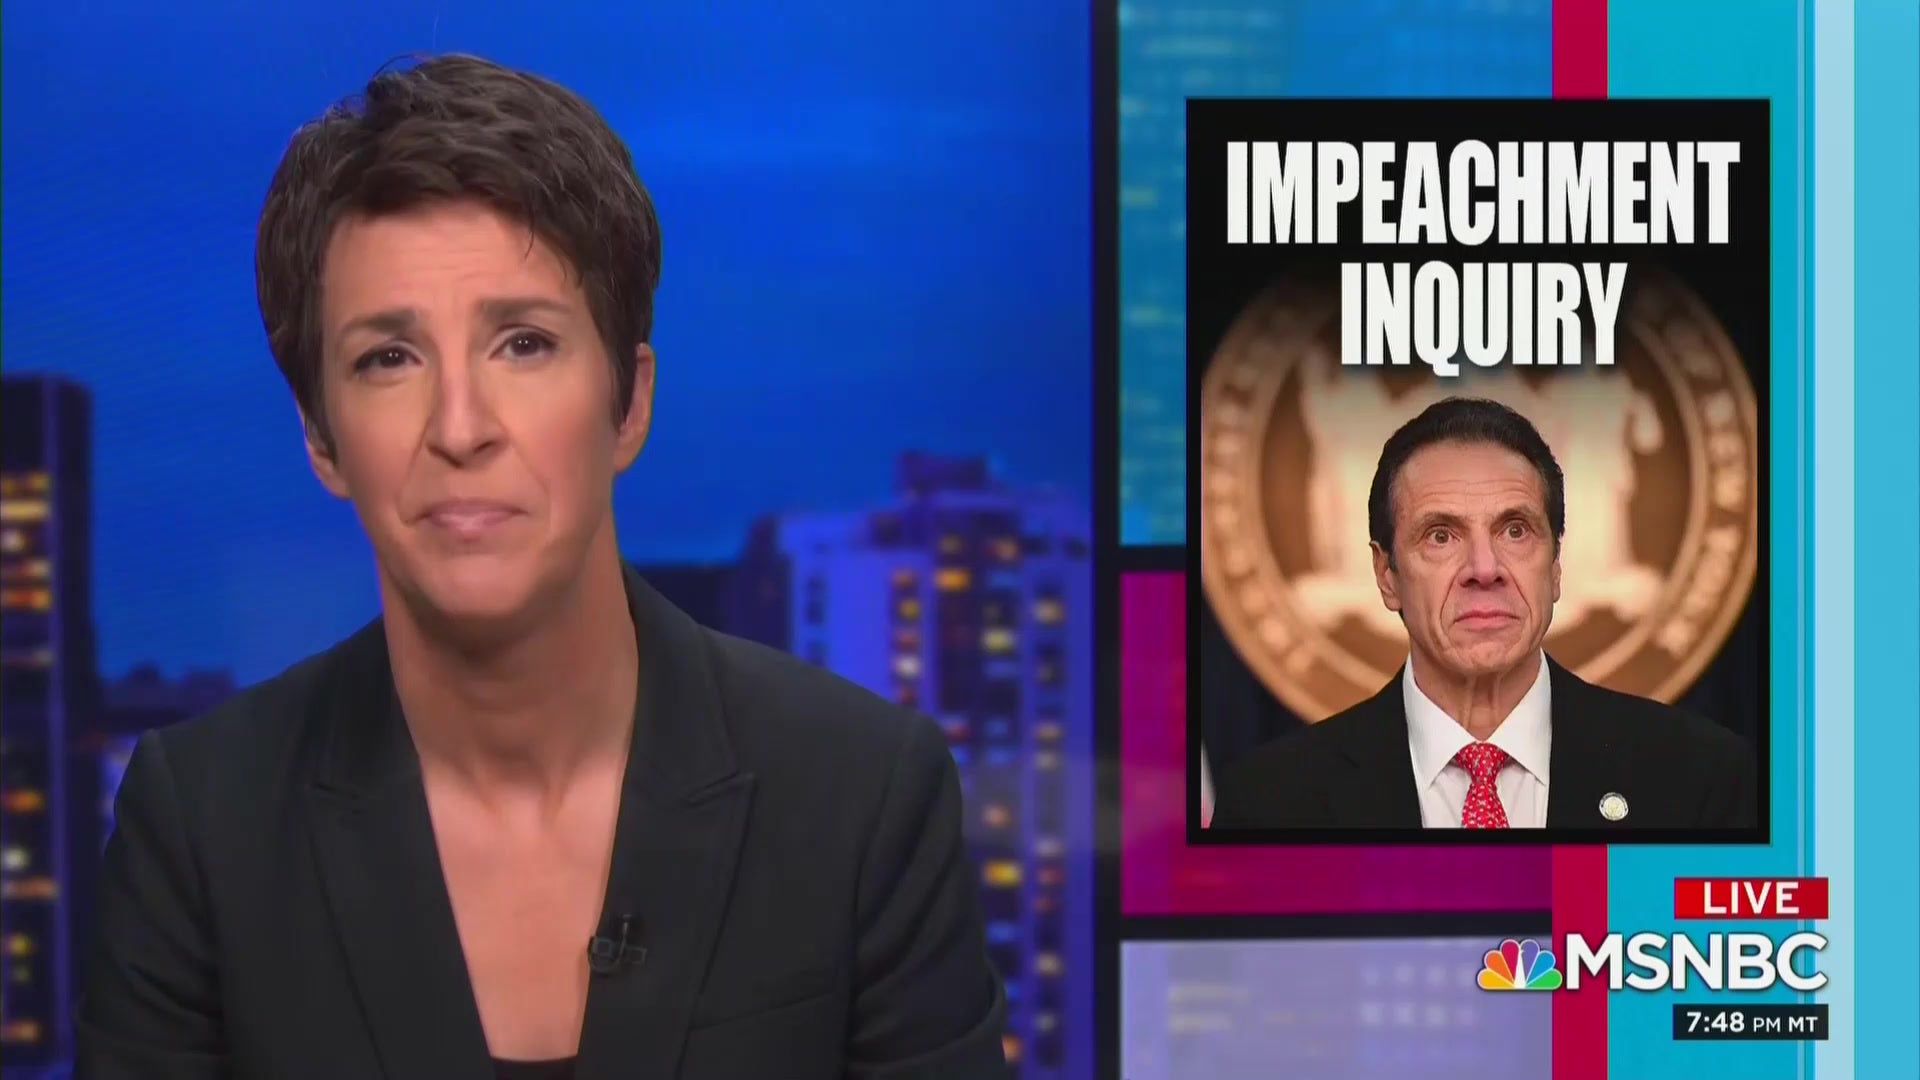 Rachel Maddow breaks silence on Cuomo, warns MSNBC viewers his scandals are 'developing by the second'